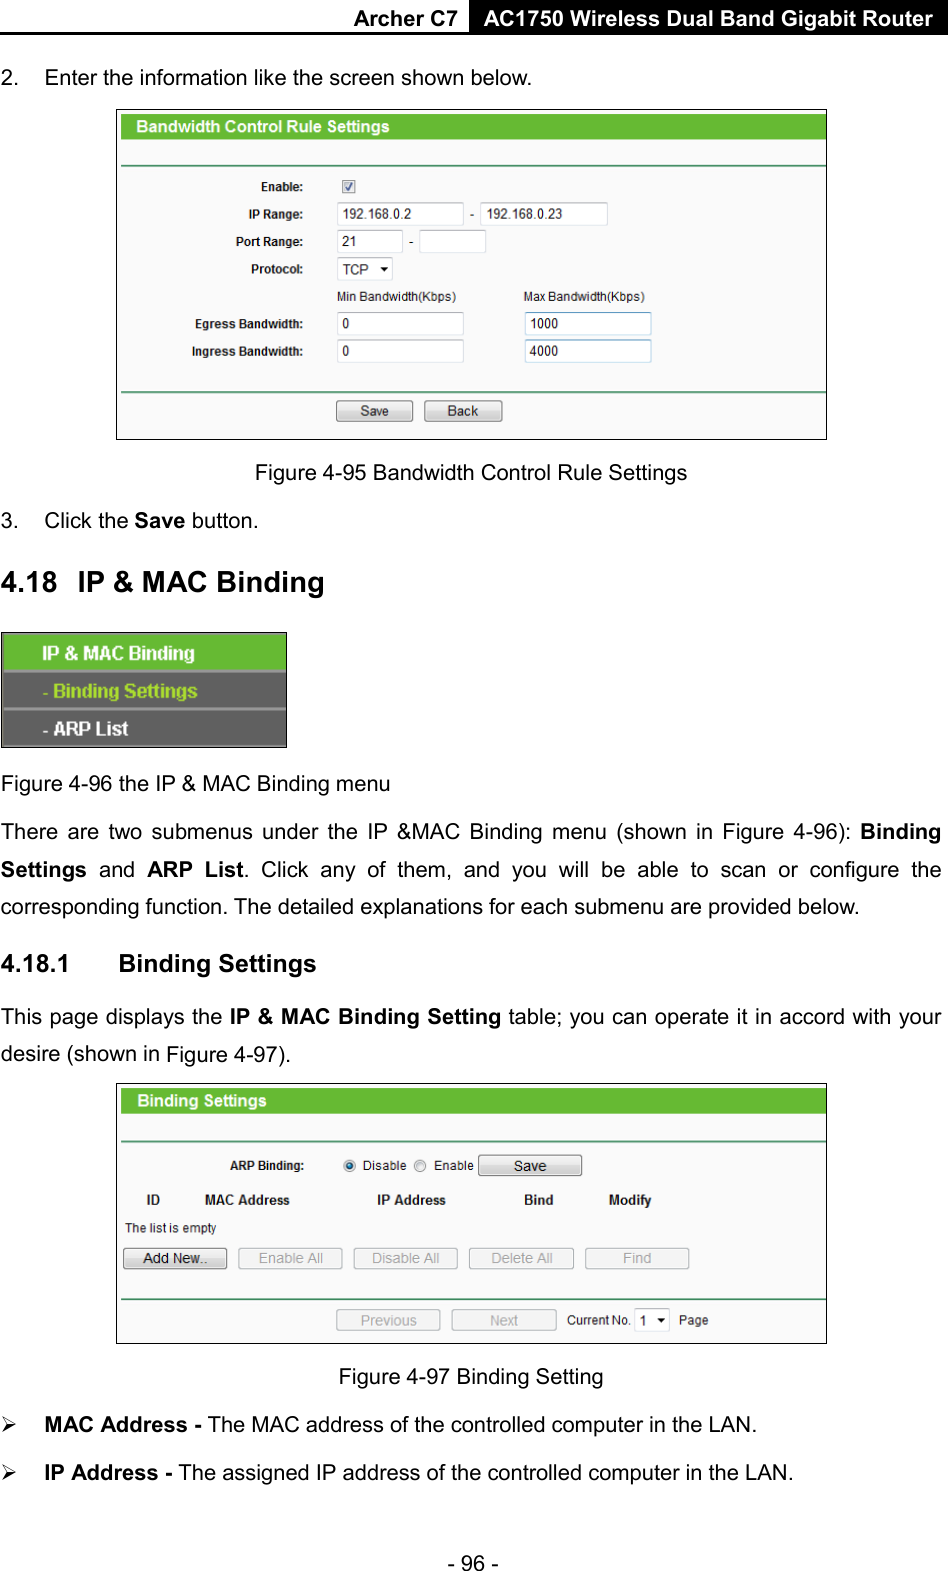 Archer C7 AC1750 Wireless Dual Band Gigabit Router  - 96 - 2. Enter the information like the screen shown below.  Figure 4-95 Bandwidth Control Rule Settings 3. Click the Save button. 4.18 IP &amp; MAC Binding  Figure 4-96 the IP &amp; MAC Binding menu There are two submenus under the IP &amp;MAC Binding menu (shown in Figure  4-96):  Binding Settings  and ARP List. Click any of them, and you will be able to scan or configure the corresponding function. The detailed explanations for each submenu are provided below. 4.18.1 Binding Settings This page displays the IP &amp; MAC Binding Setting table; you can operate it in accord with your desire (shown in Figure 4-97).    Figure 4-97 Binding Setting  MAC Address - The MAC address of the controlled computer in the LAN.    IP Address - The assigned IP address of the controlled computer in the LAN.   